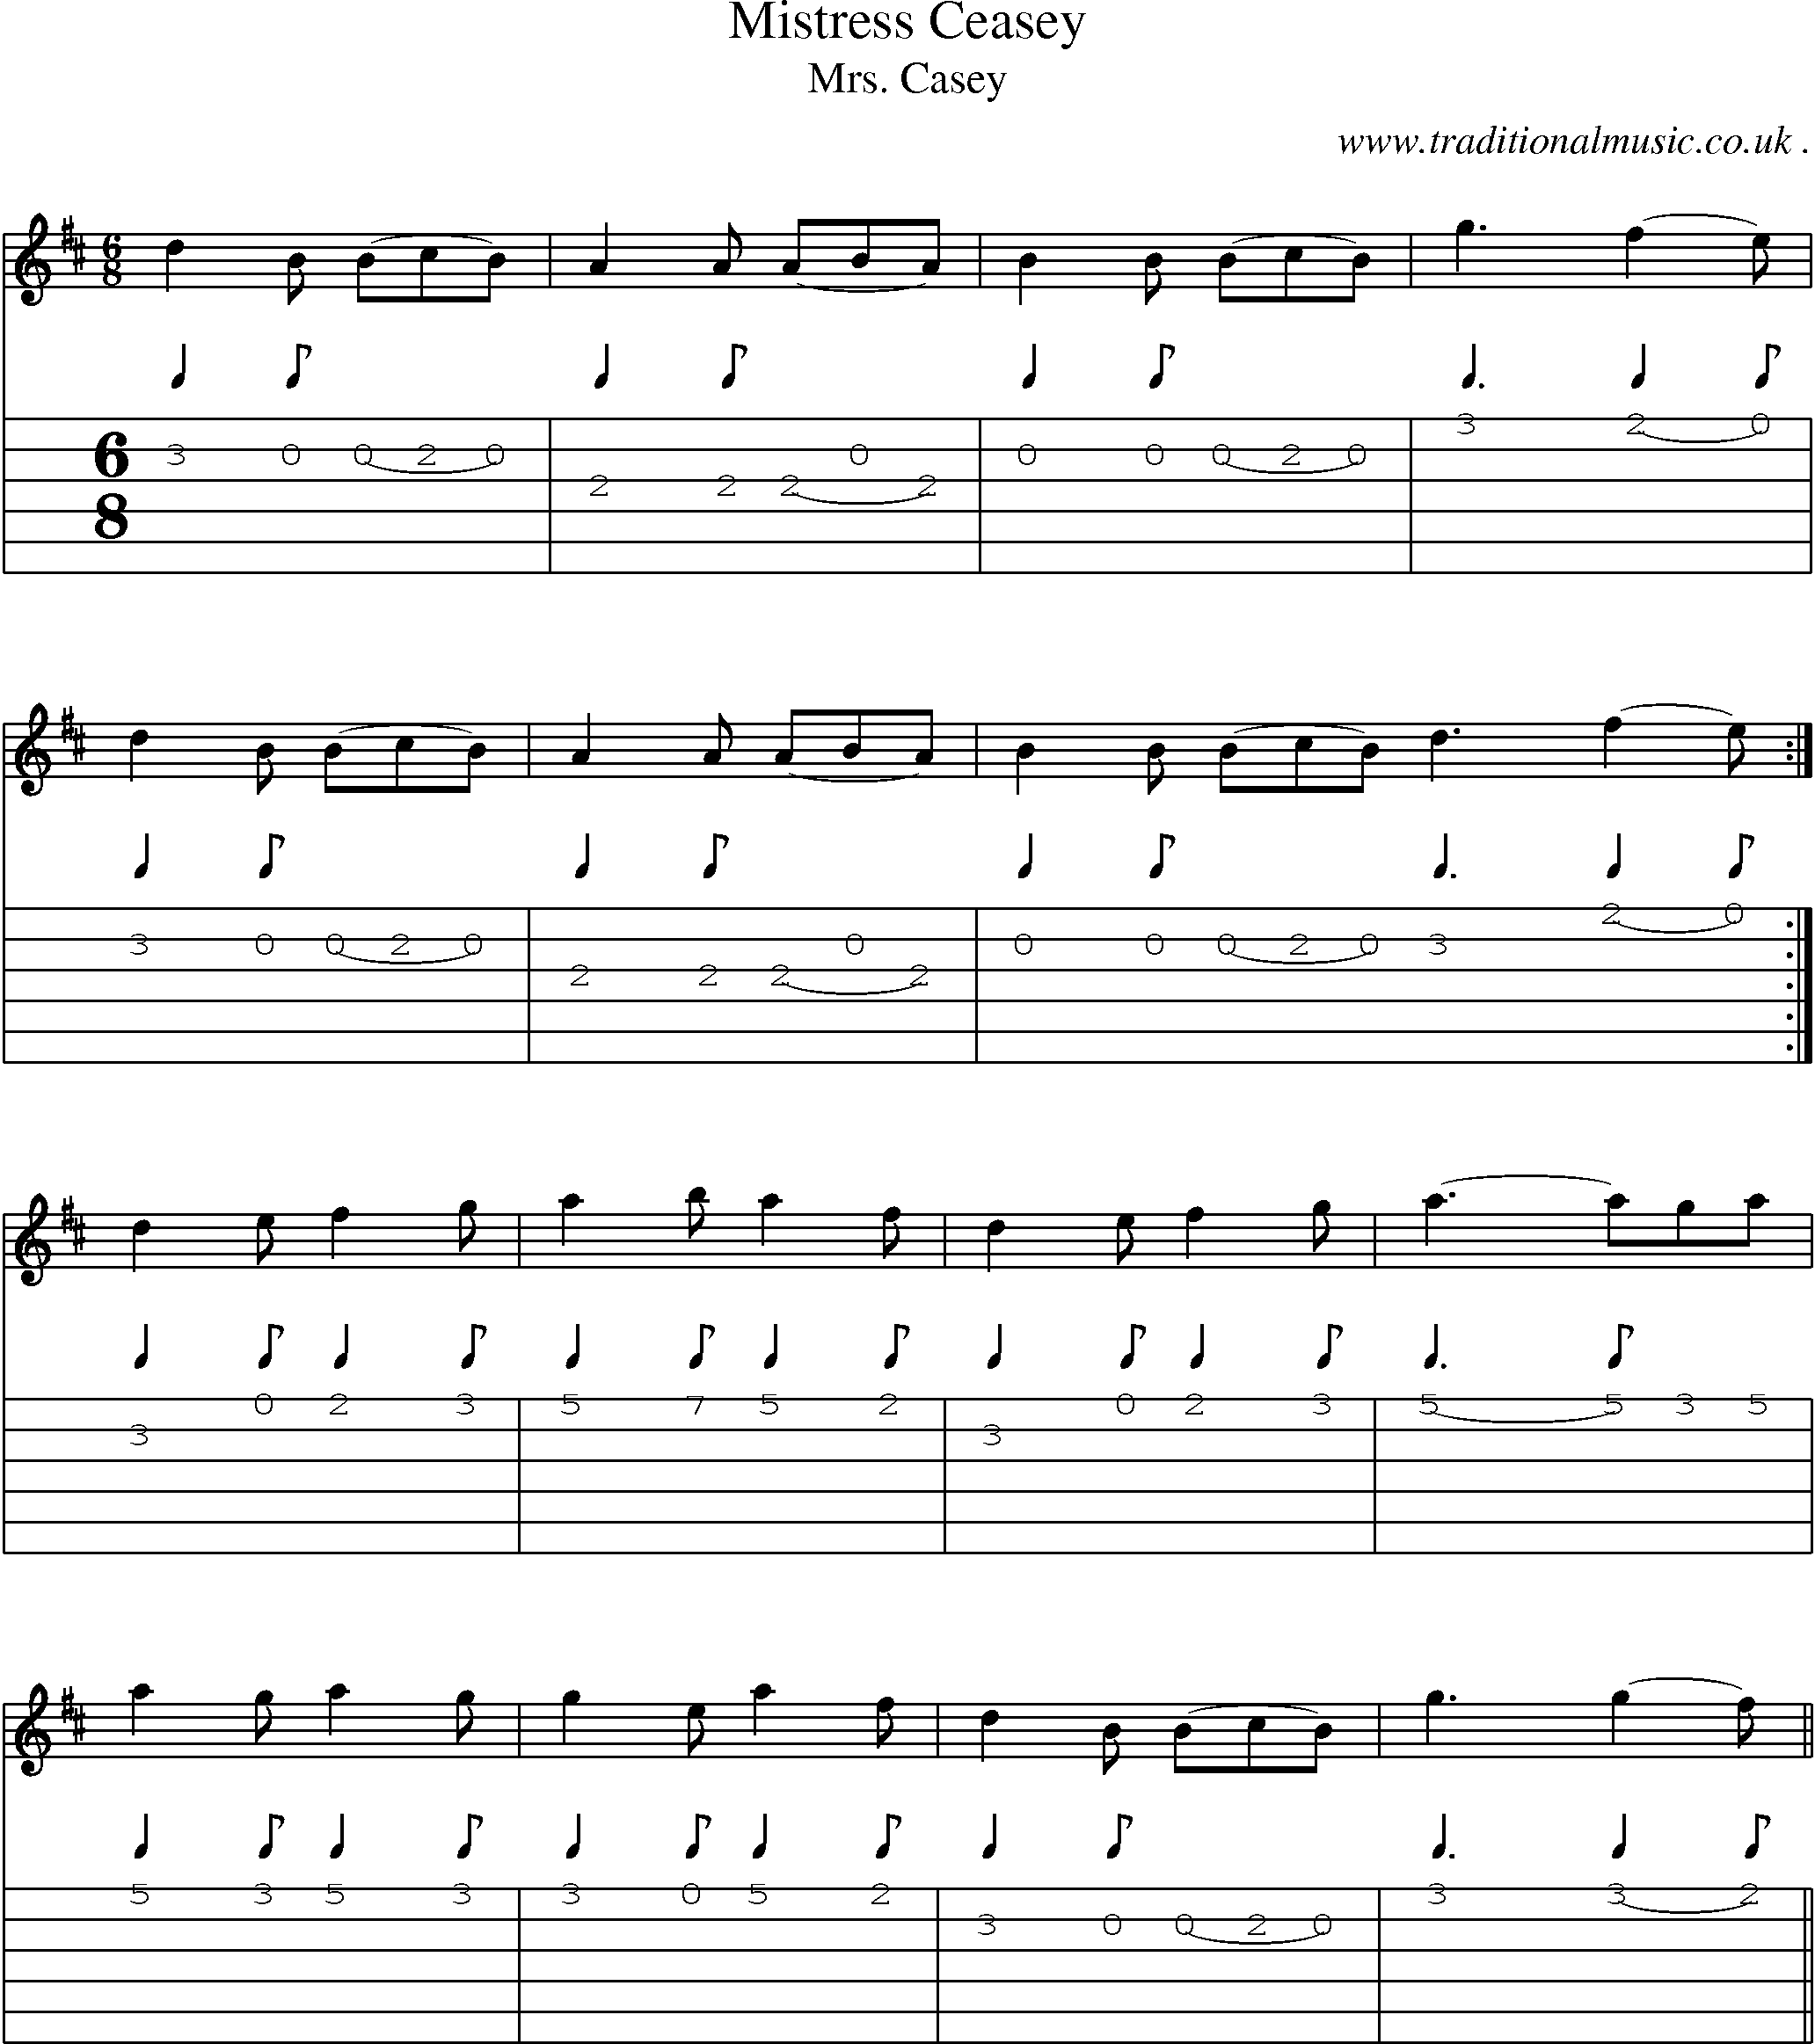 Sheet-Music and Guitar Tabs for Mistress Ceasey